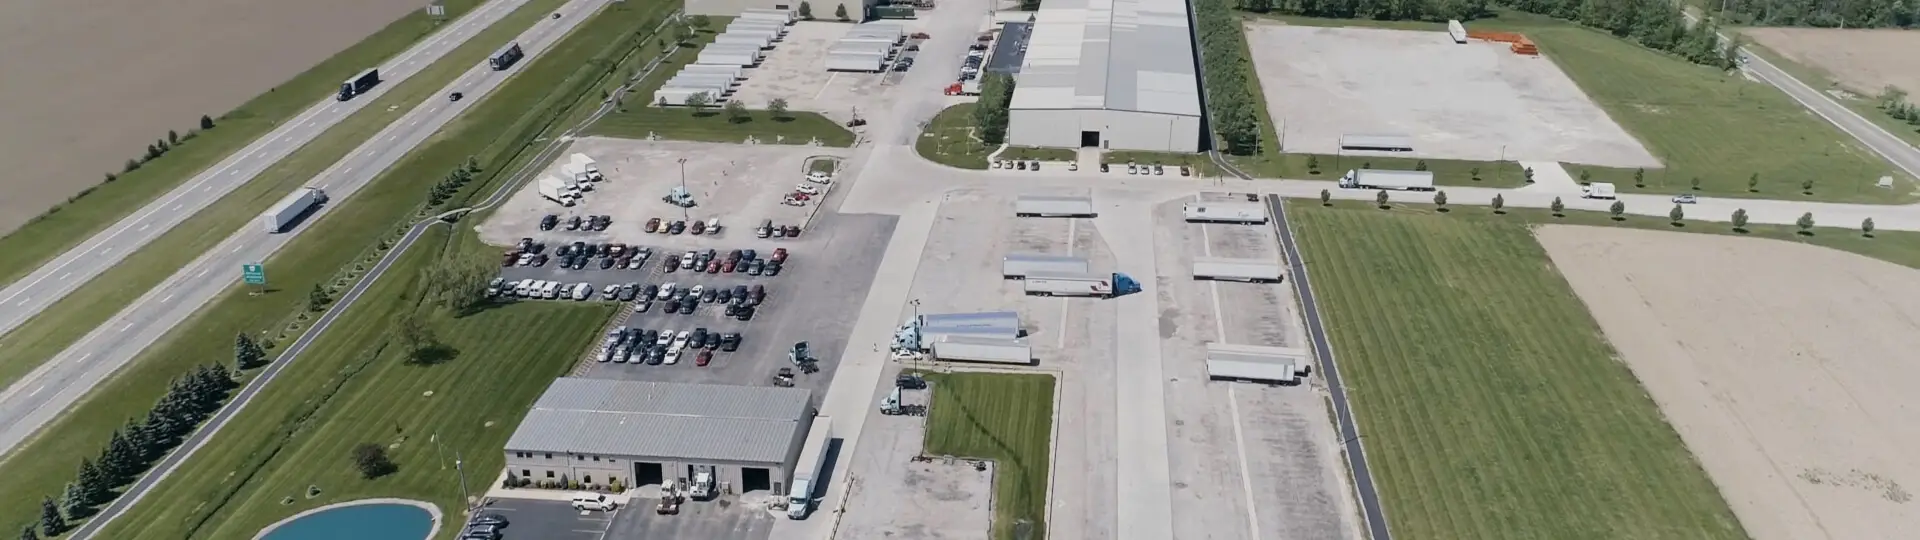 aerial view of a large warehouse facility